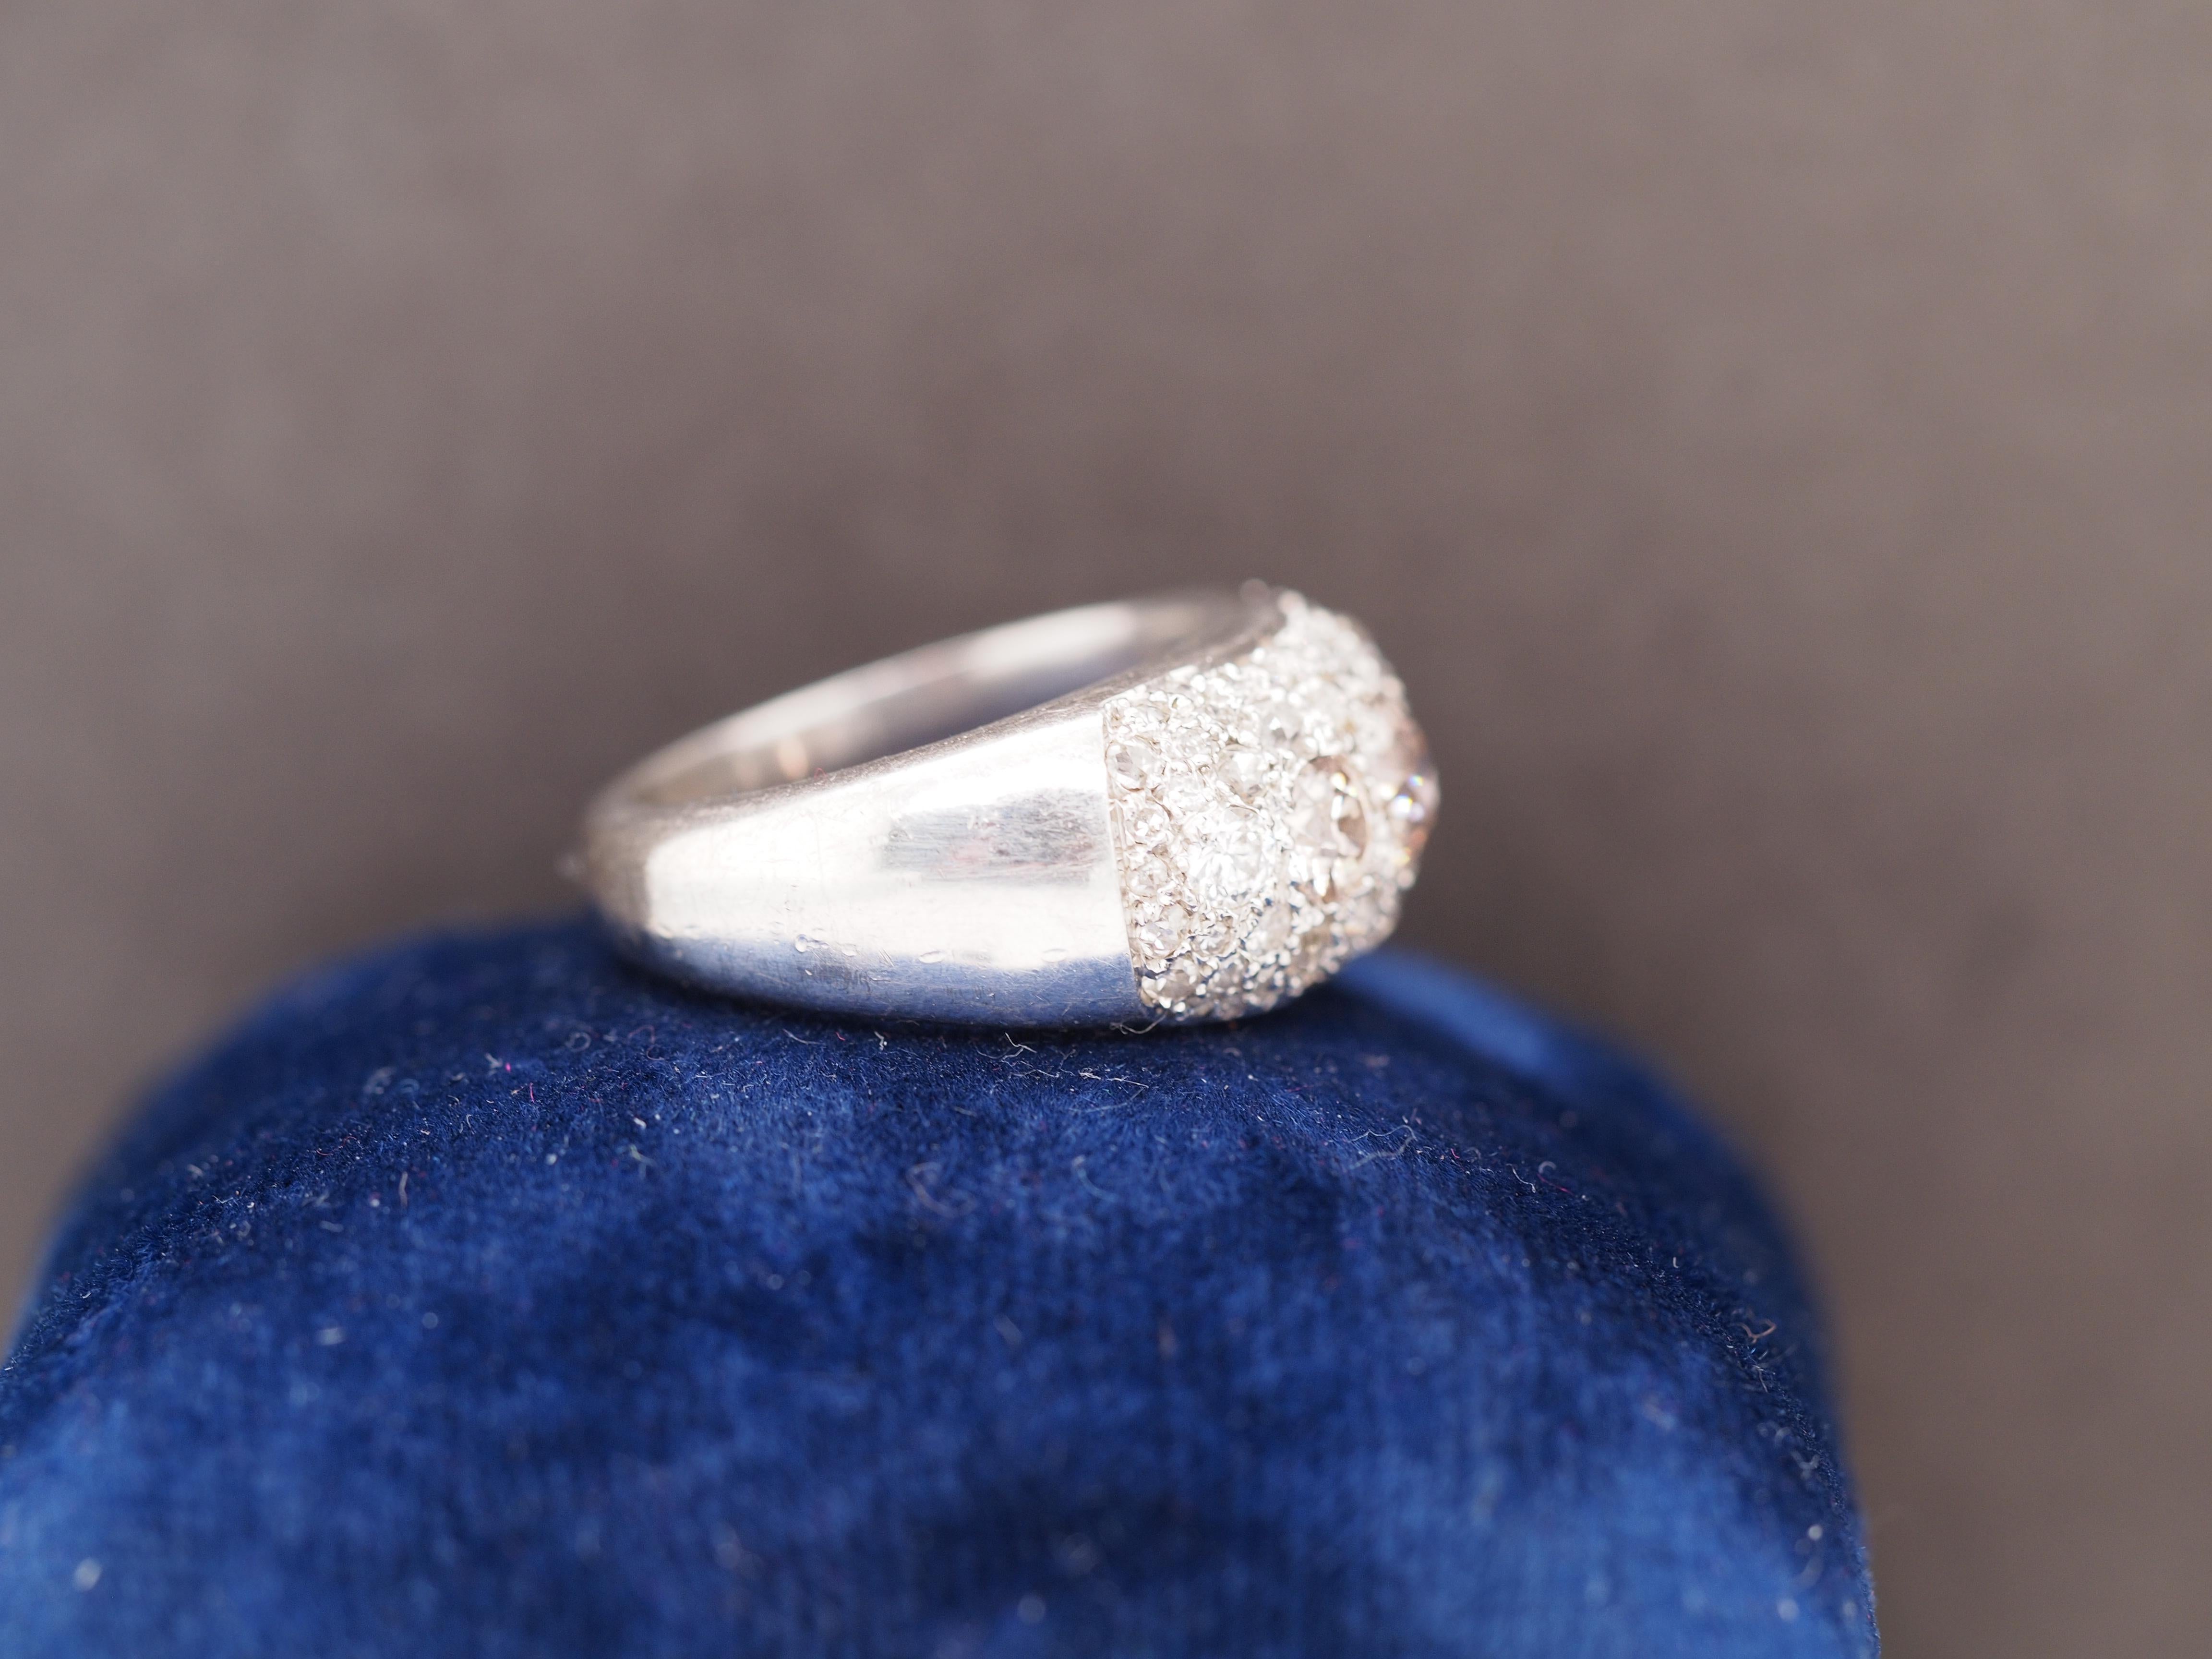 Year: 1930s
Item Details:
Ring Size: 7
Metal Type: Platinum [Hallmarked, and Tested]
Weight: 9.8 grams
Diamond Details:
Center Diamond: .50ct, Old Mine Brilliant, Fancy Brown, VS Clarity, Natural Diamond, Natural Color
Side Stone Details: 1.00ct